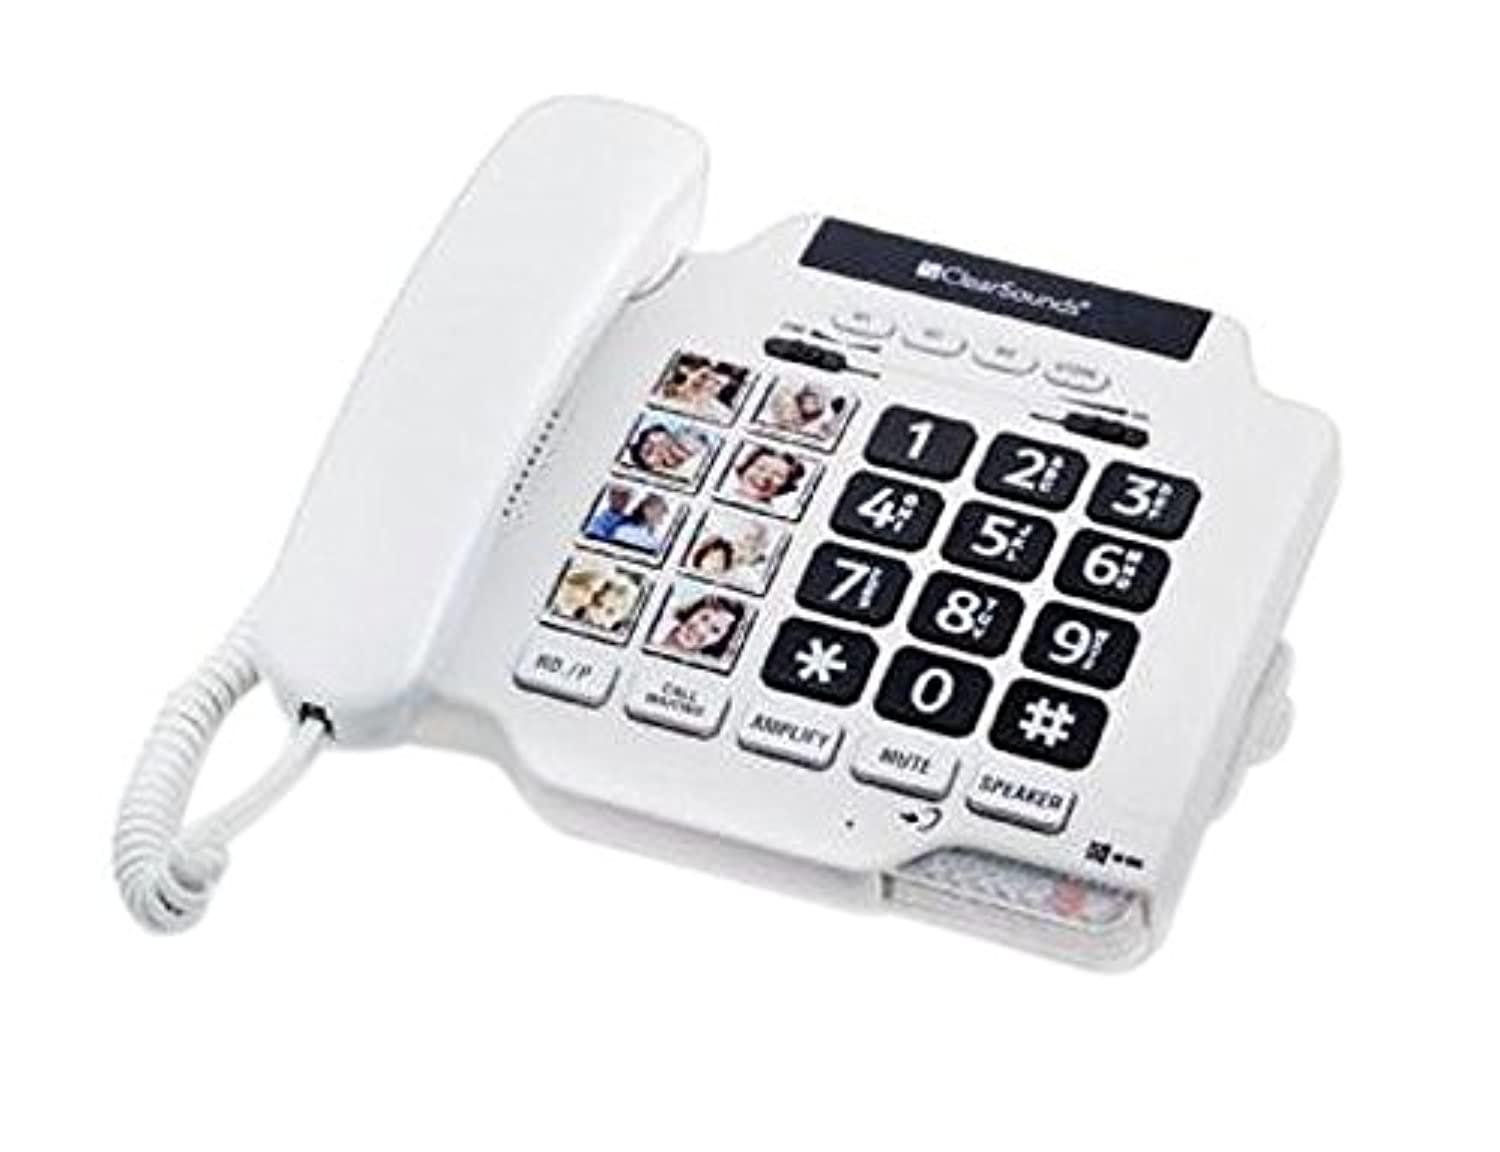 clearsounds amplified visual ringer corded spirit phone - white